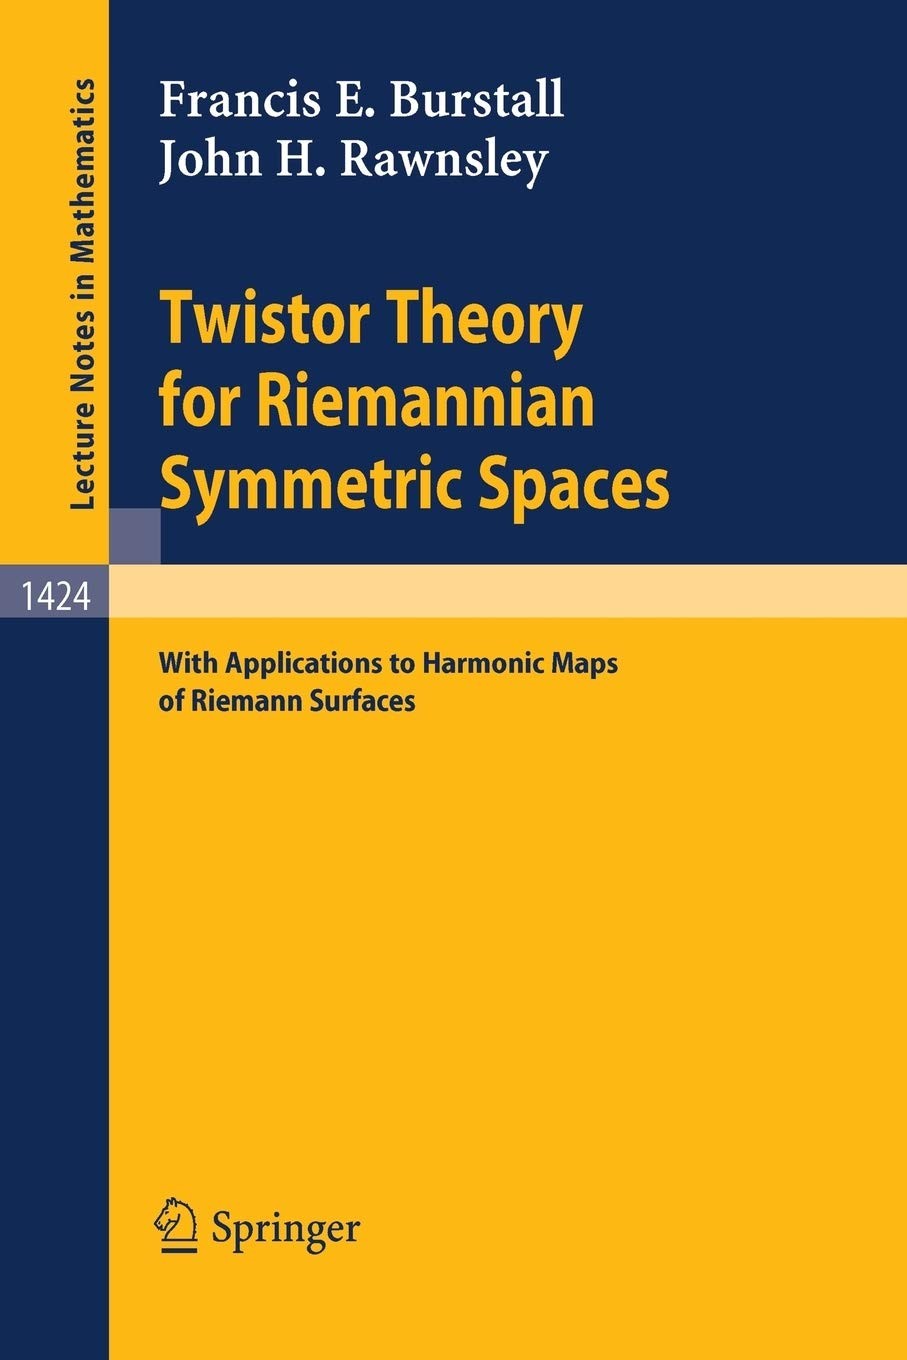 Twistor Theory for Riemannian Symmetric Spaces: With Applications to Harmonic Maps of Riemann Surfaces